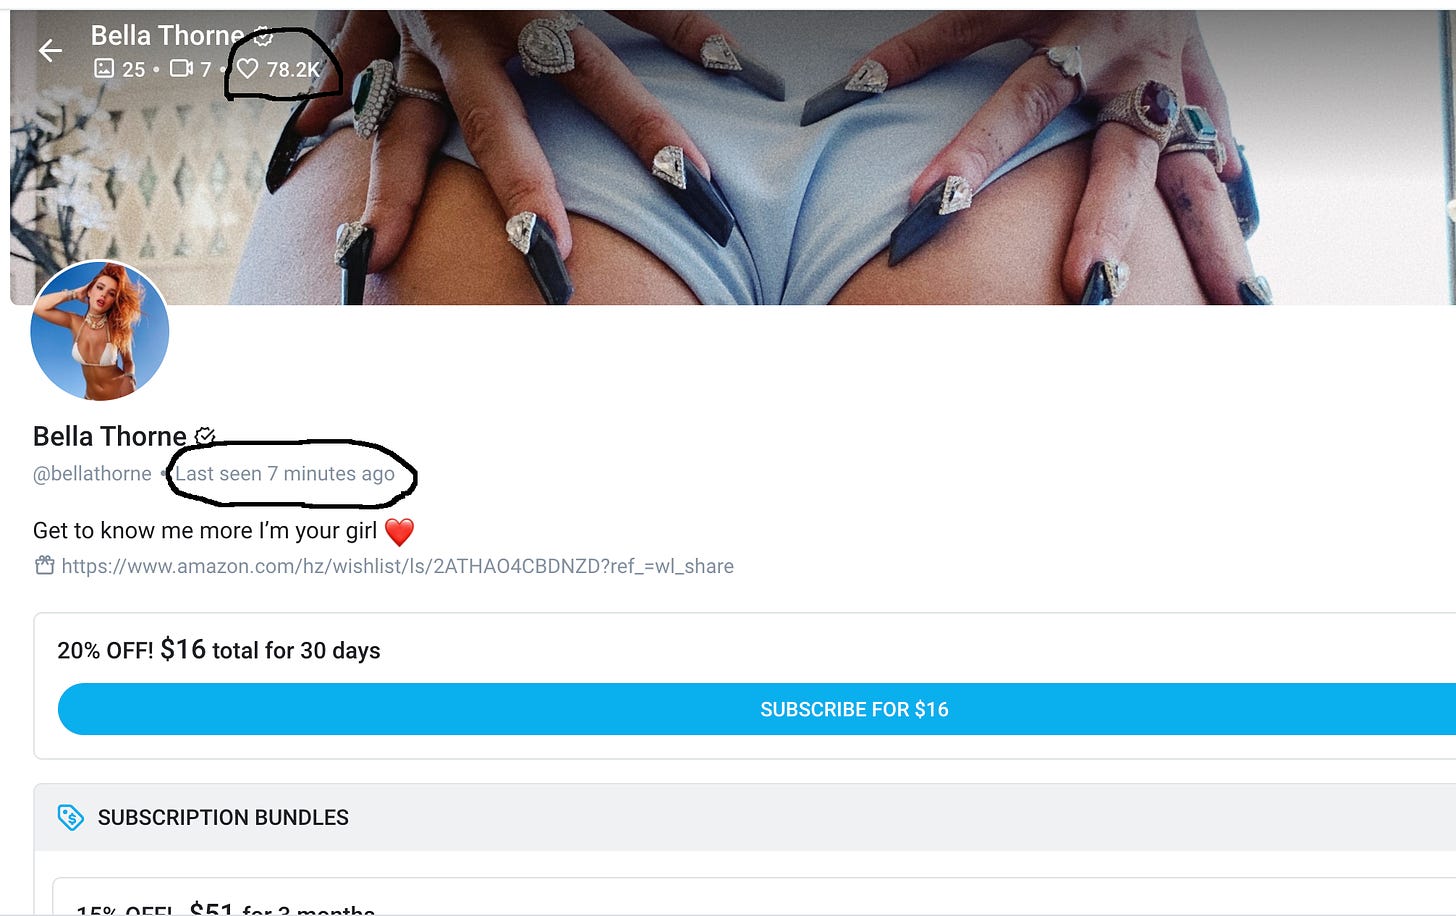 Below is a screenshot from Bella Thorne’s OnlyFans profile - there are some...